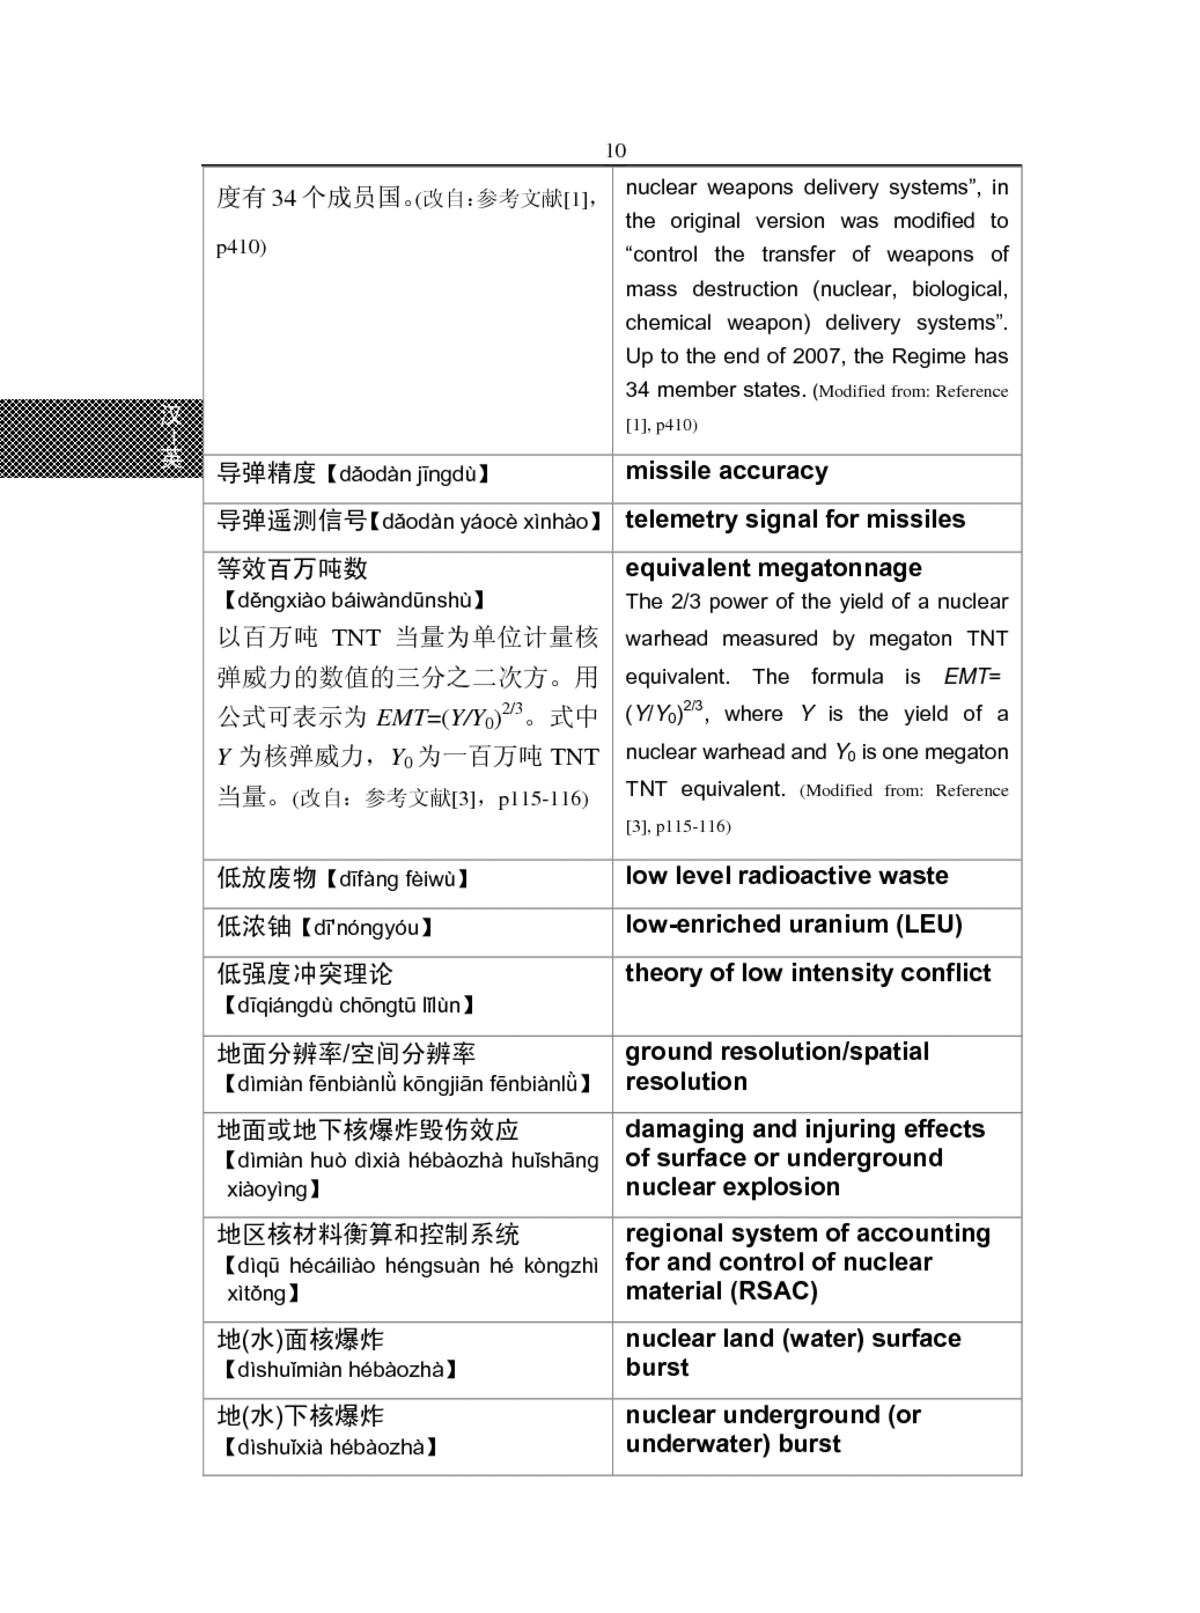 Text Chinese Version English Chinese Chinese English Nuclear Security Glossary The National Academies Press